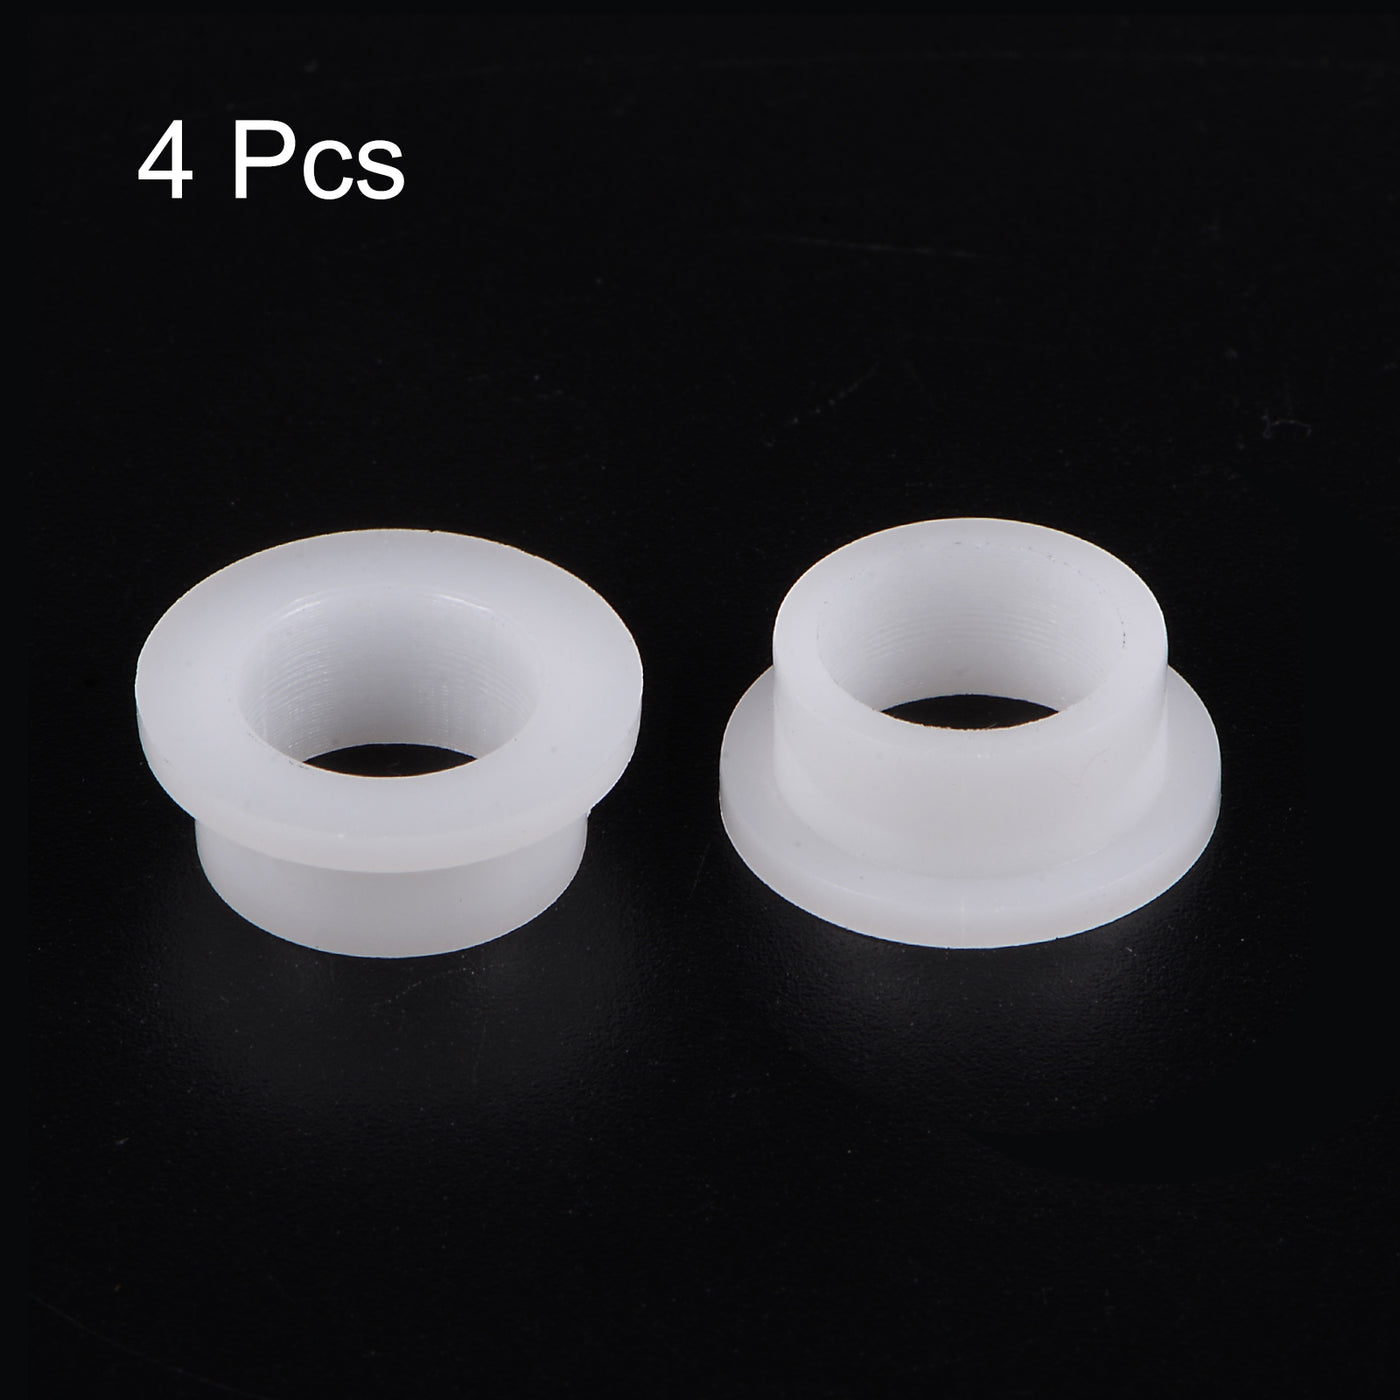 uxcell Uxcell 4pcs Flanged Sleeve Bearings 10mm ID 13mm OD 6.5mm Length Nylon Bushings, White